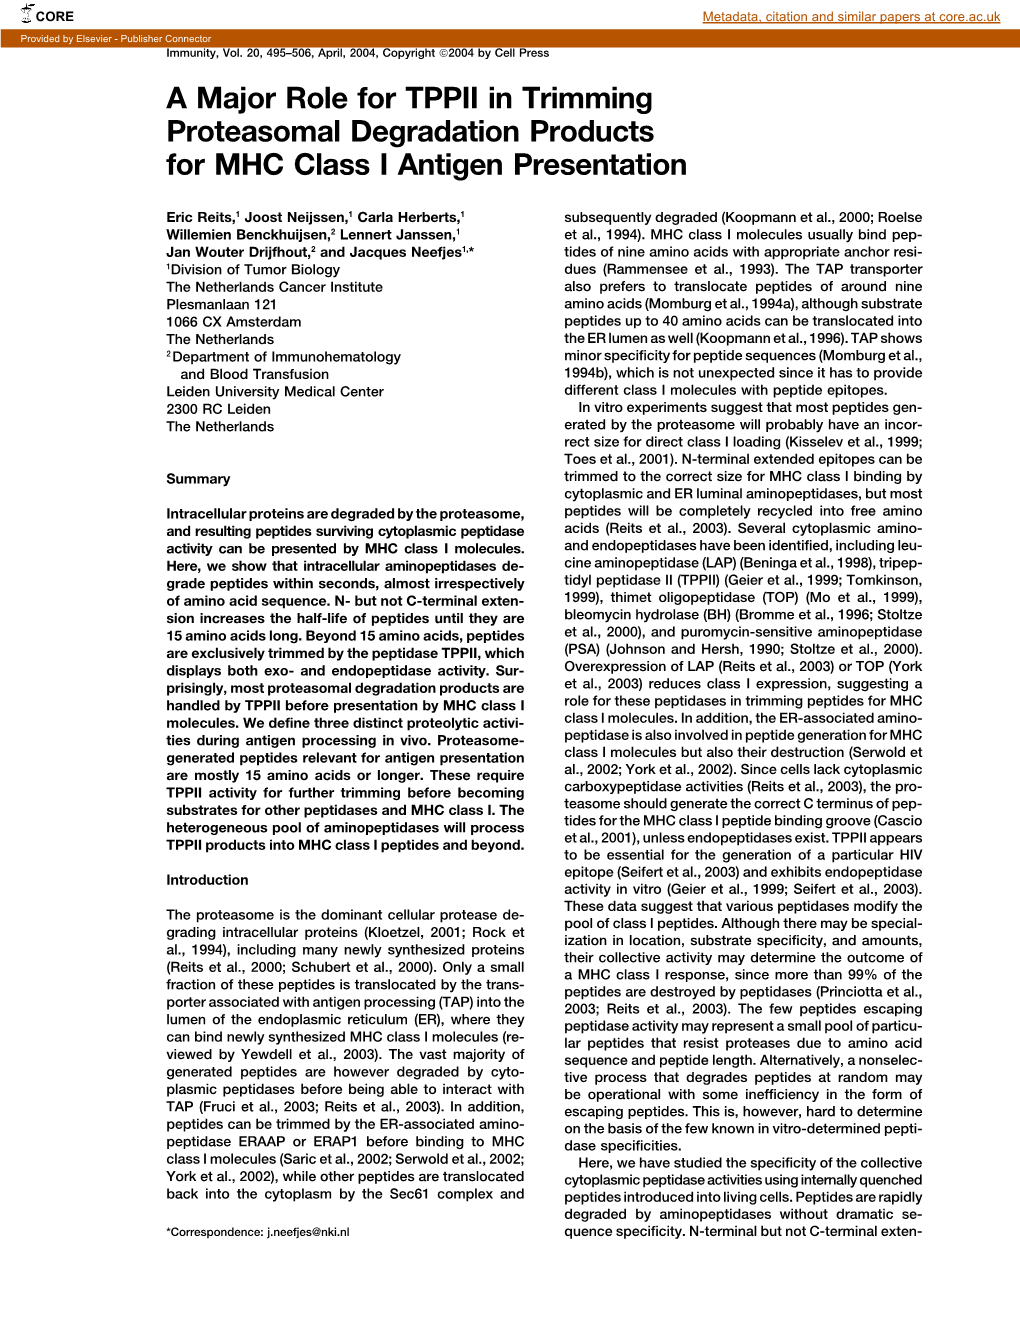 A Major Role for TPPII in Trimming Proteasomal Degradation Products for MHC Class I Antigen Presentation